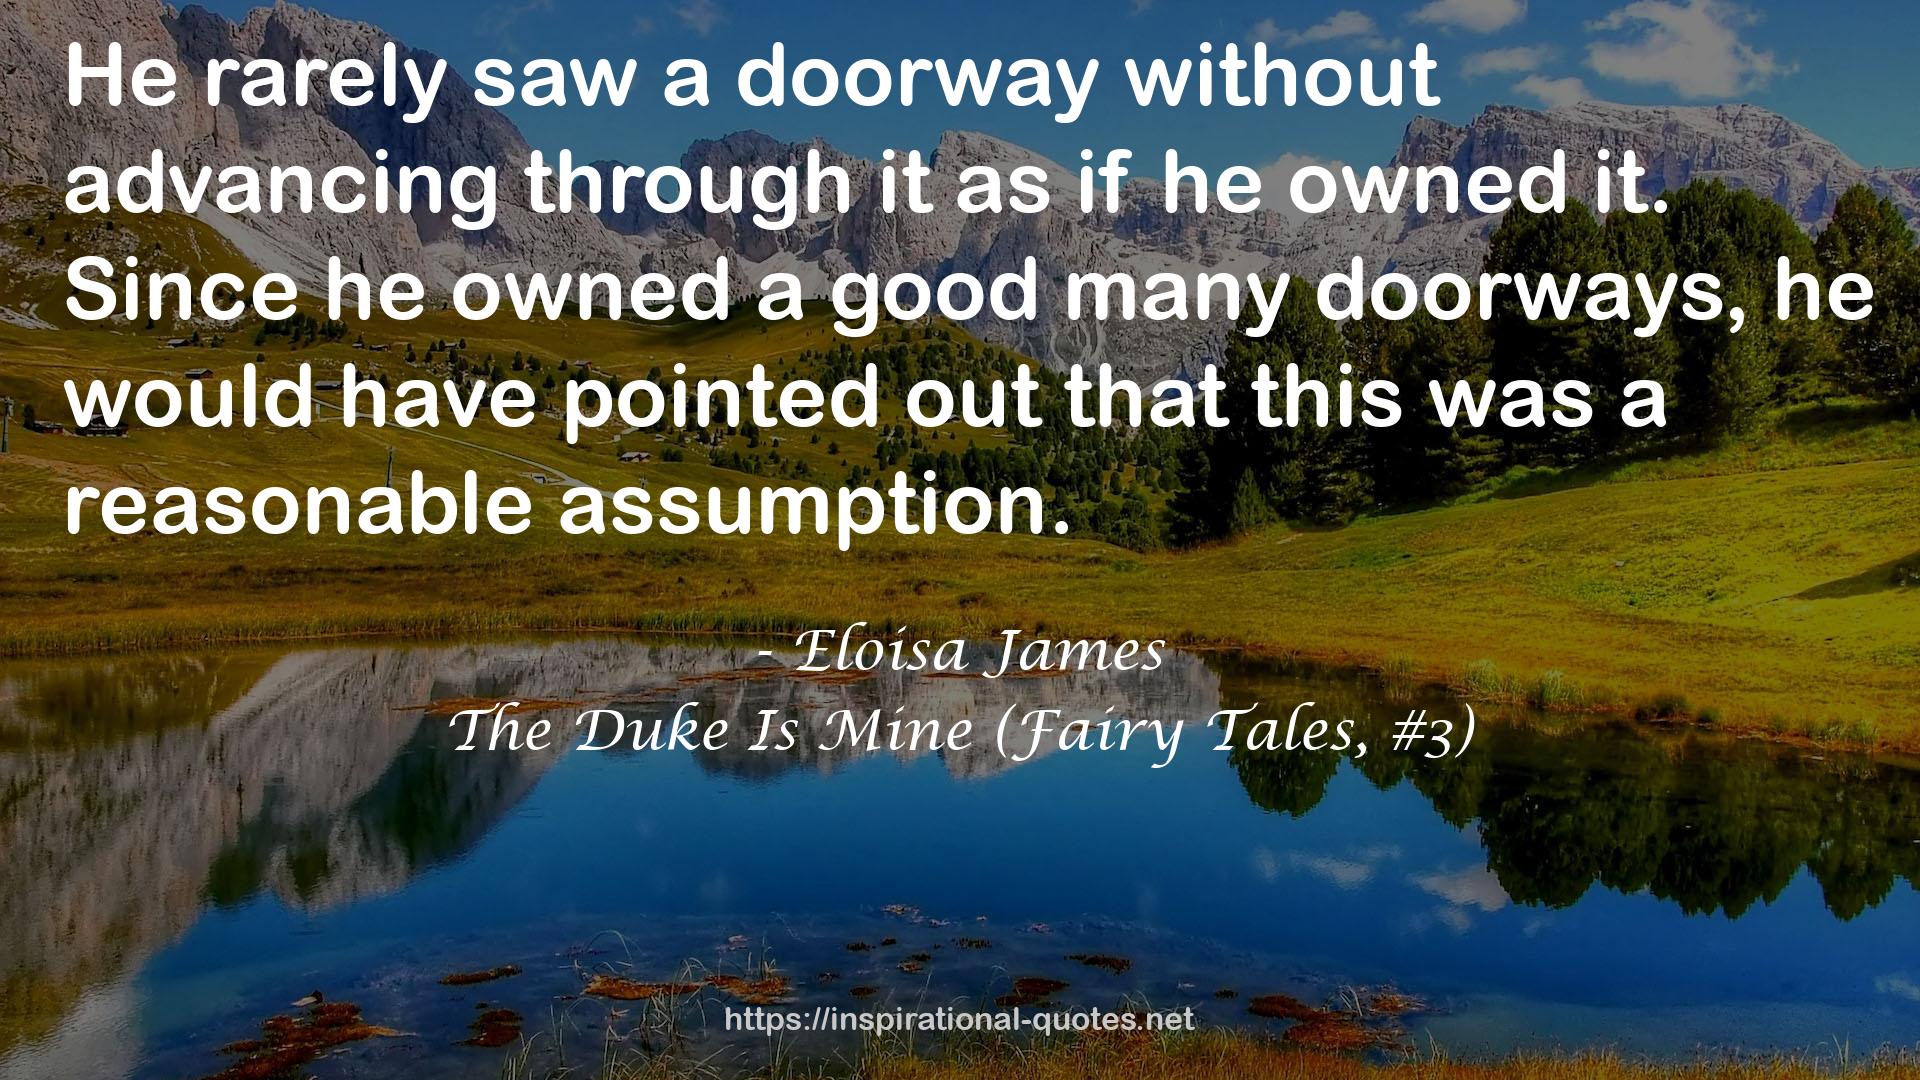 The Duke Is Mine (Fairy Tales, #3) QUOTES